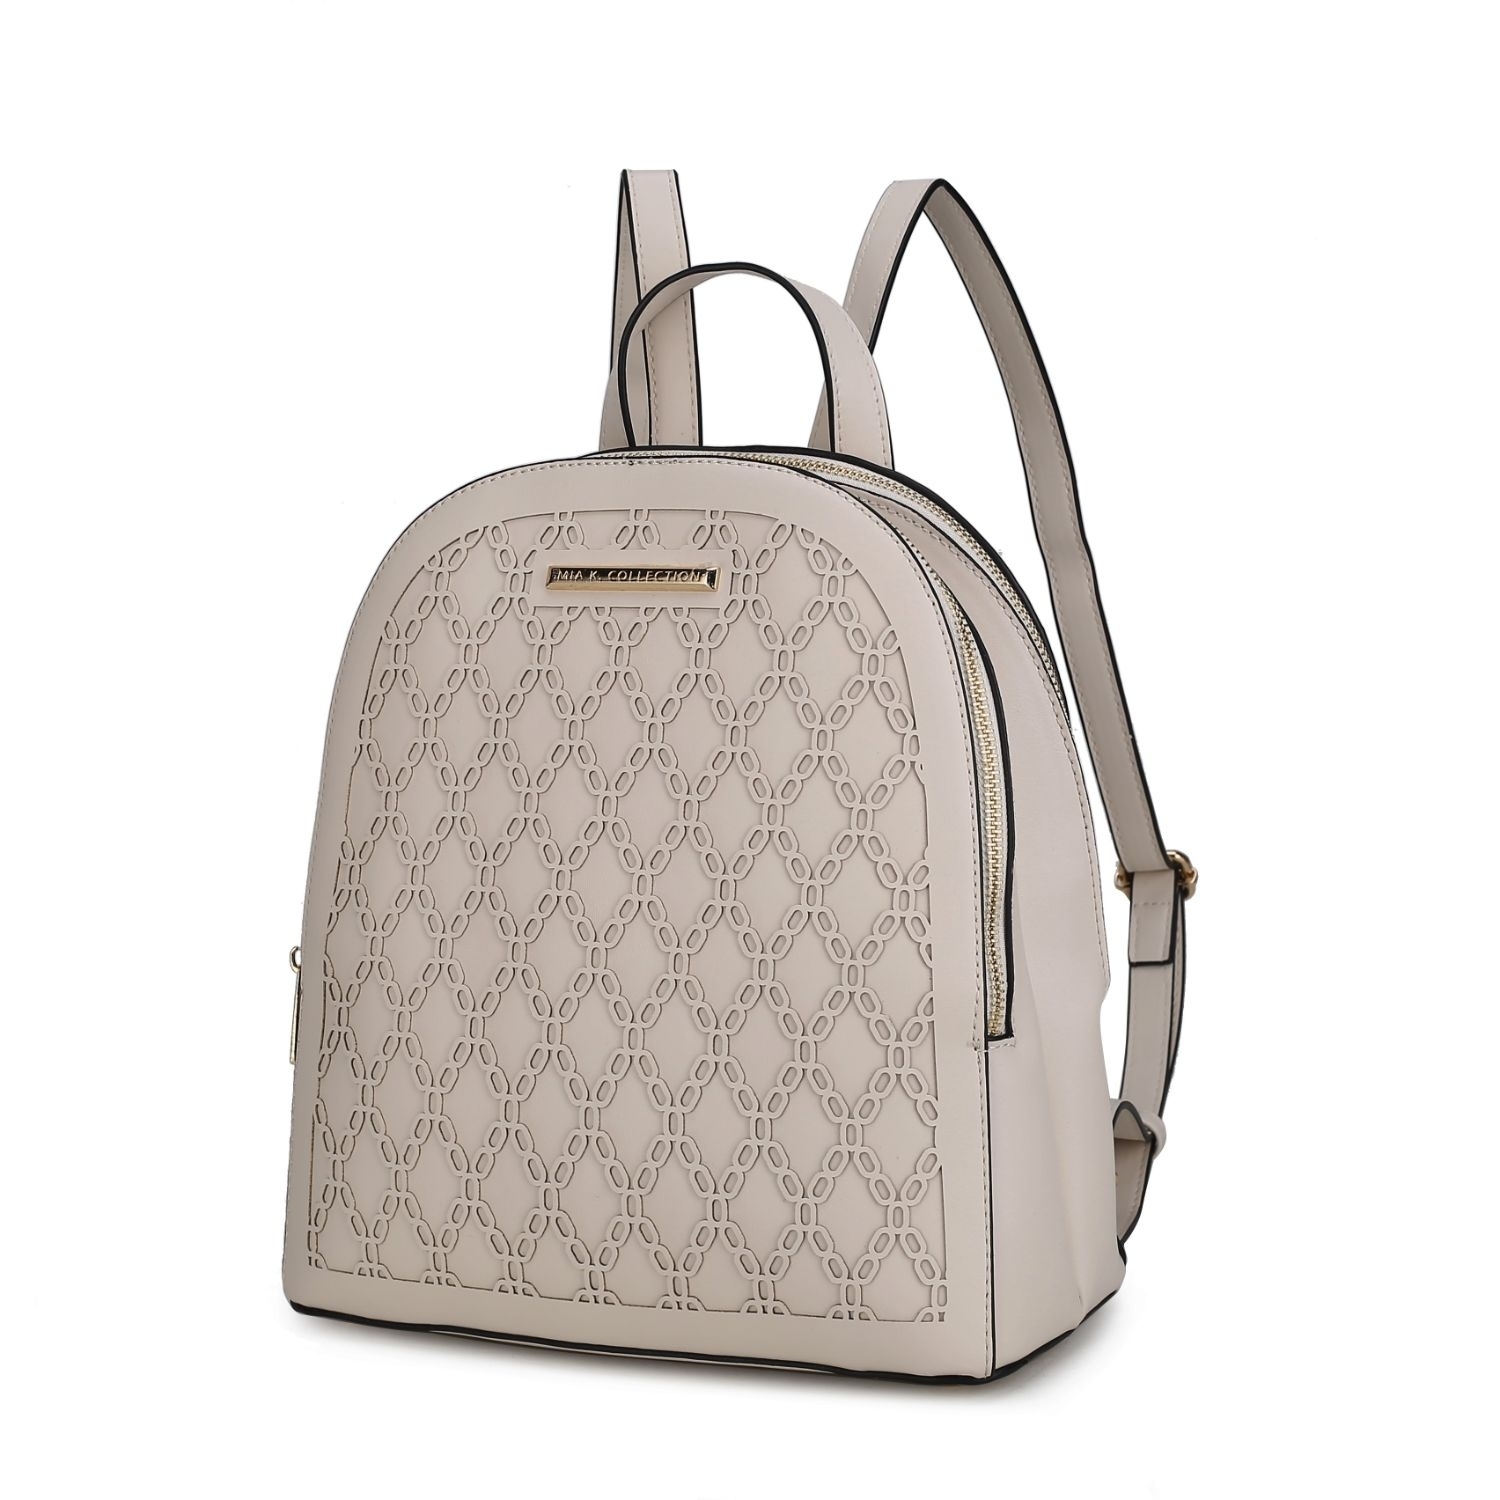 MKF Collection Sloane Vegan Leather Multi Compartment Backpack By Mia K. - Light Blue